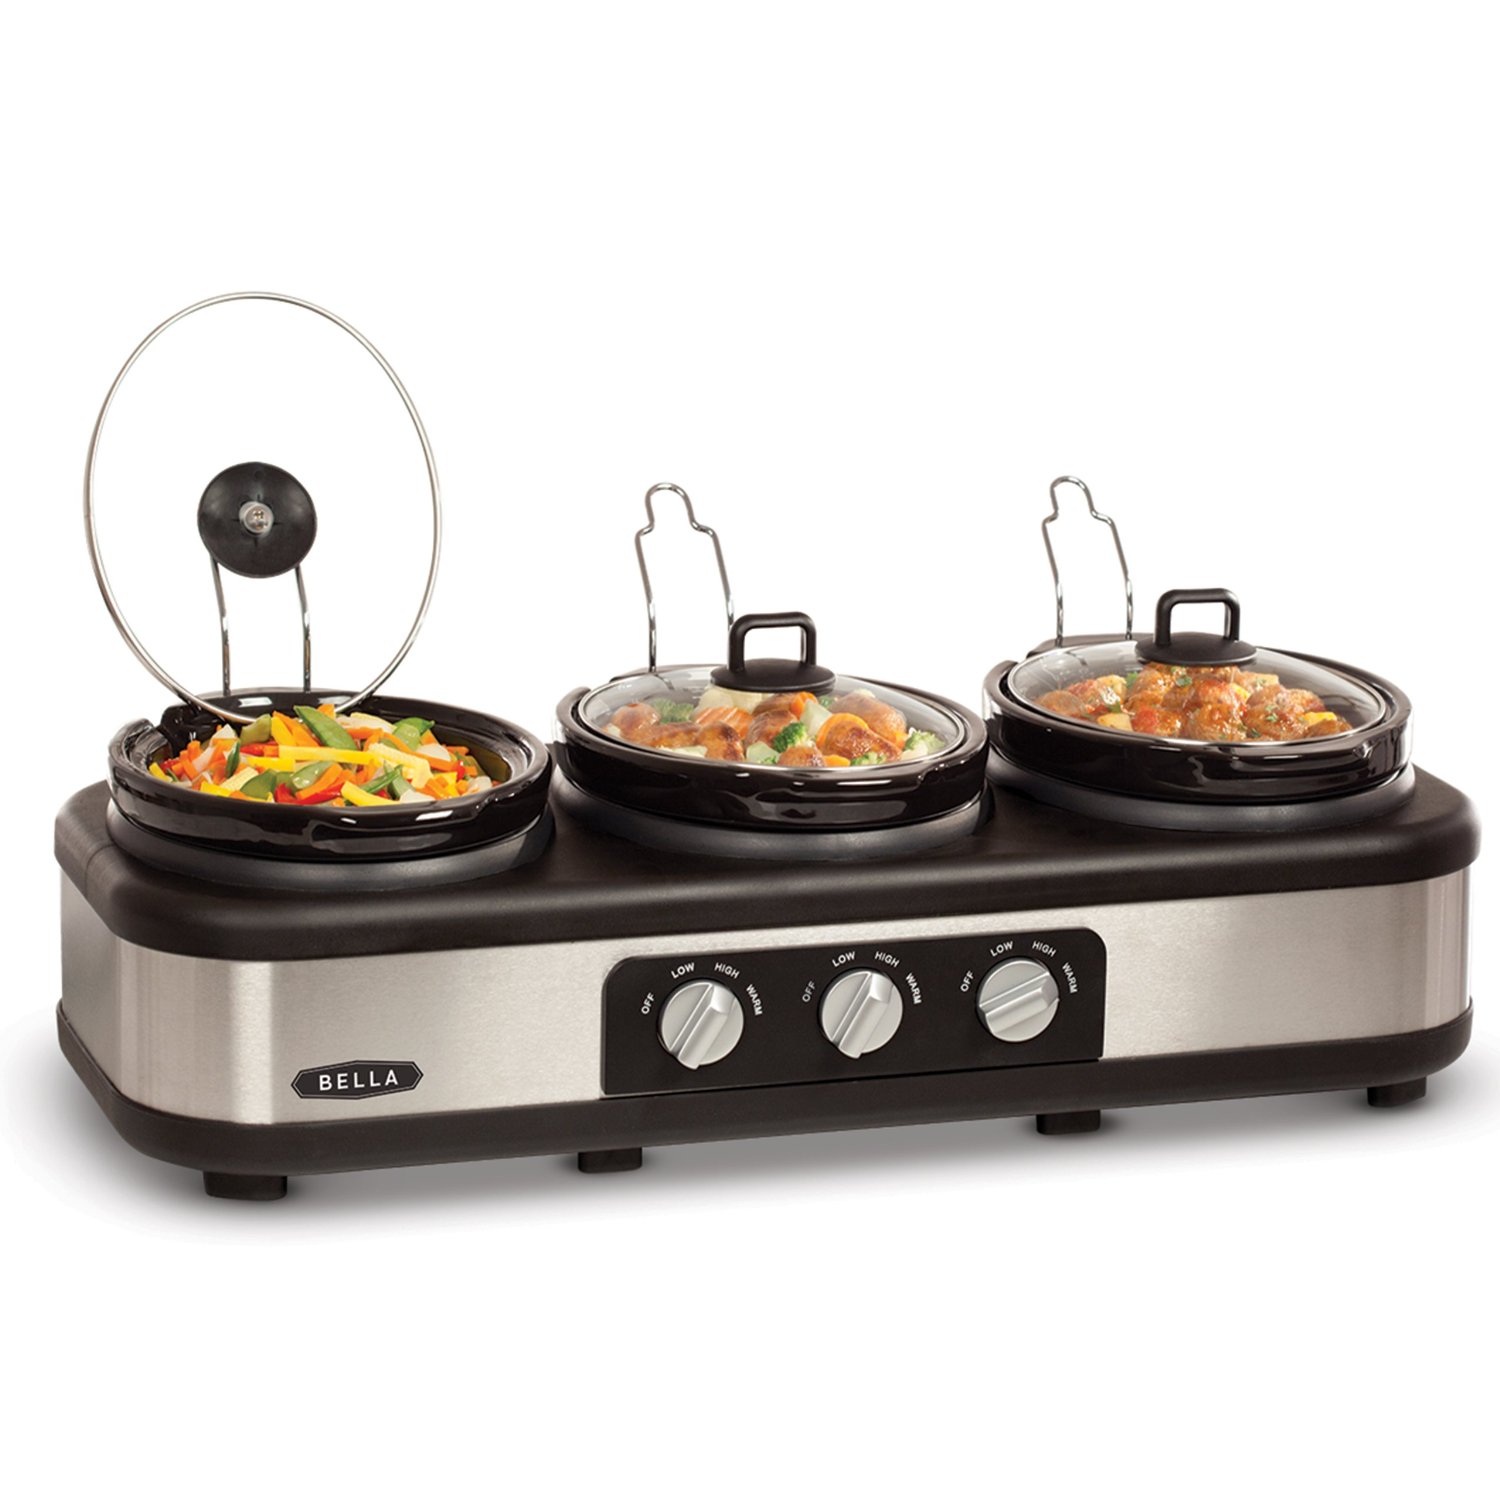 3 X 2.5QT Triple Slow Cooker with Lid Rest, Stainless Steel